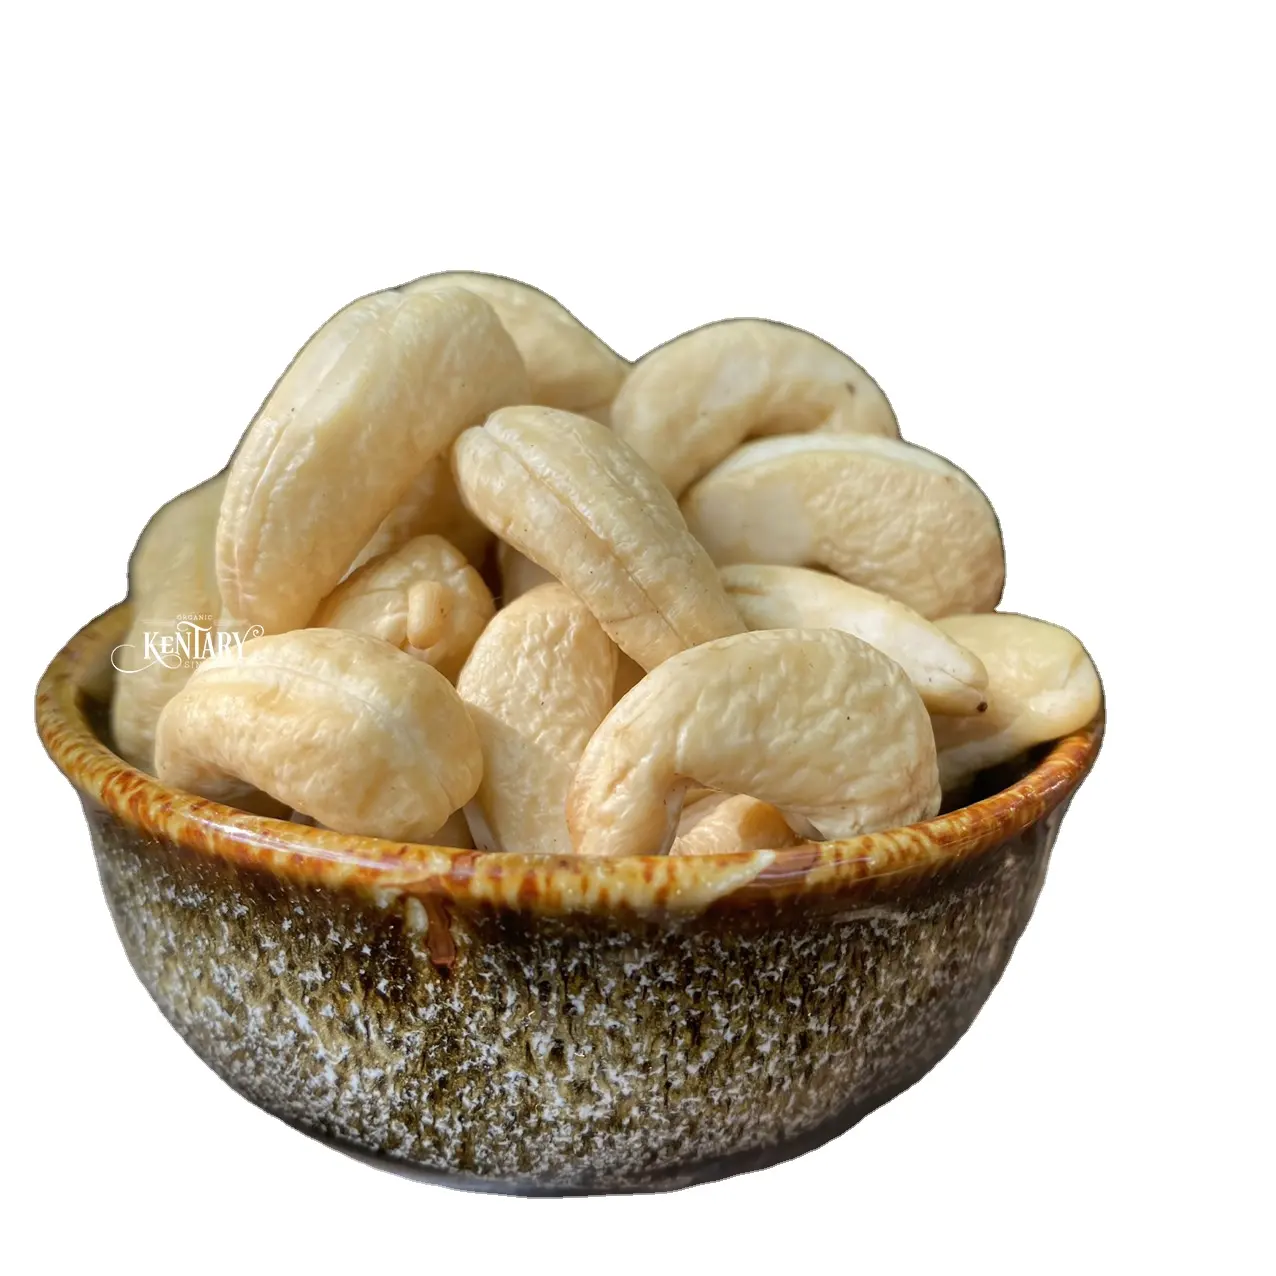 Bulk Vietnam Raw Whole Cashew Nuts W320 Best Quality Best Price Factory in Vietnam 100% Natural For Wholesale